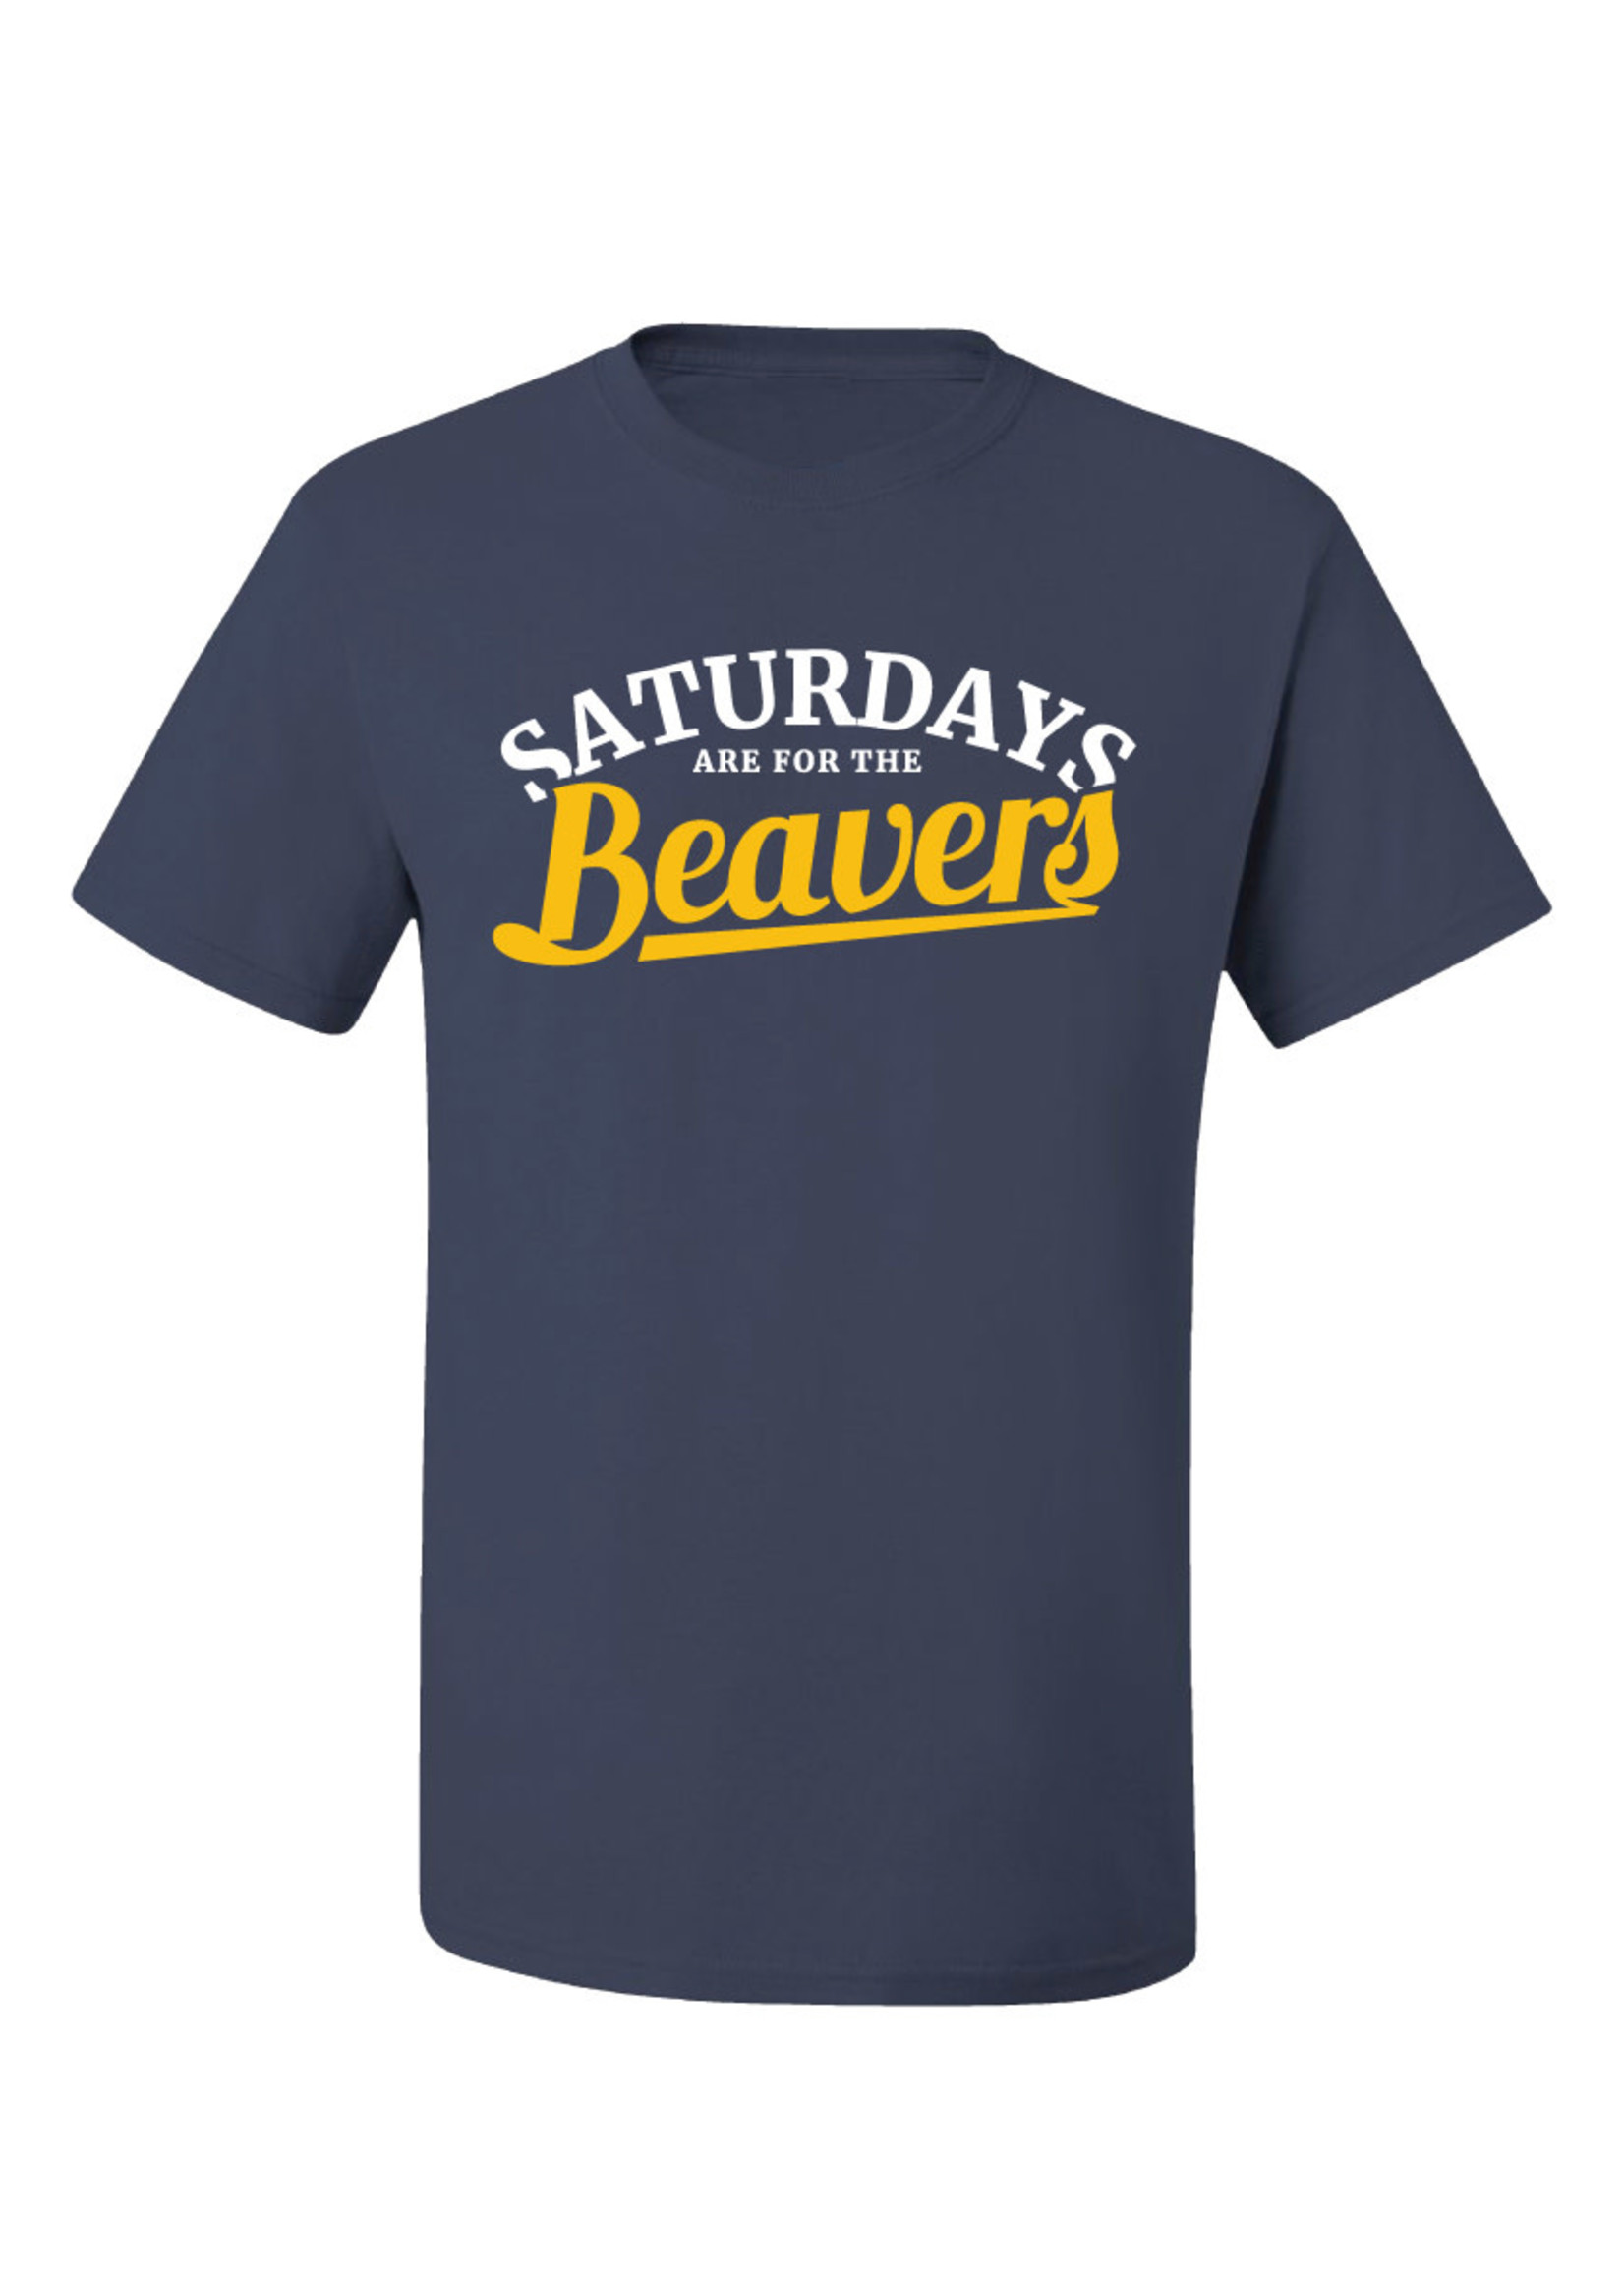 Freedom Wear Co. Saturdays are for the Beavers